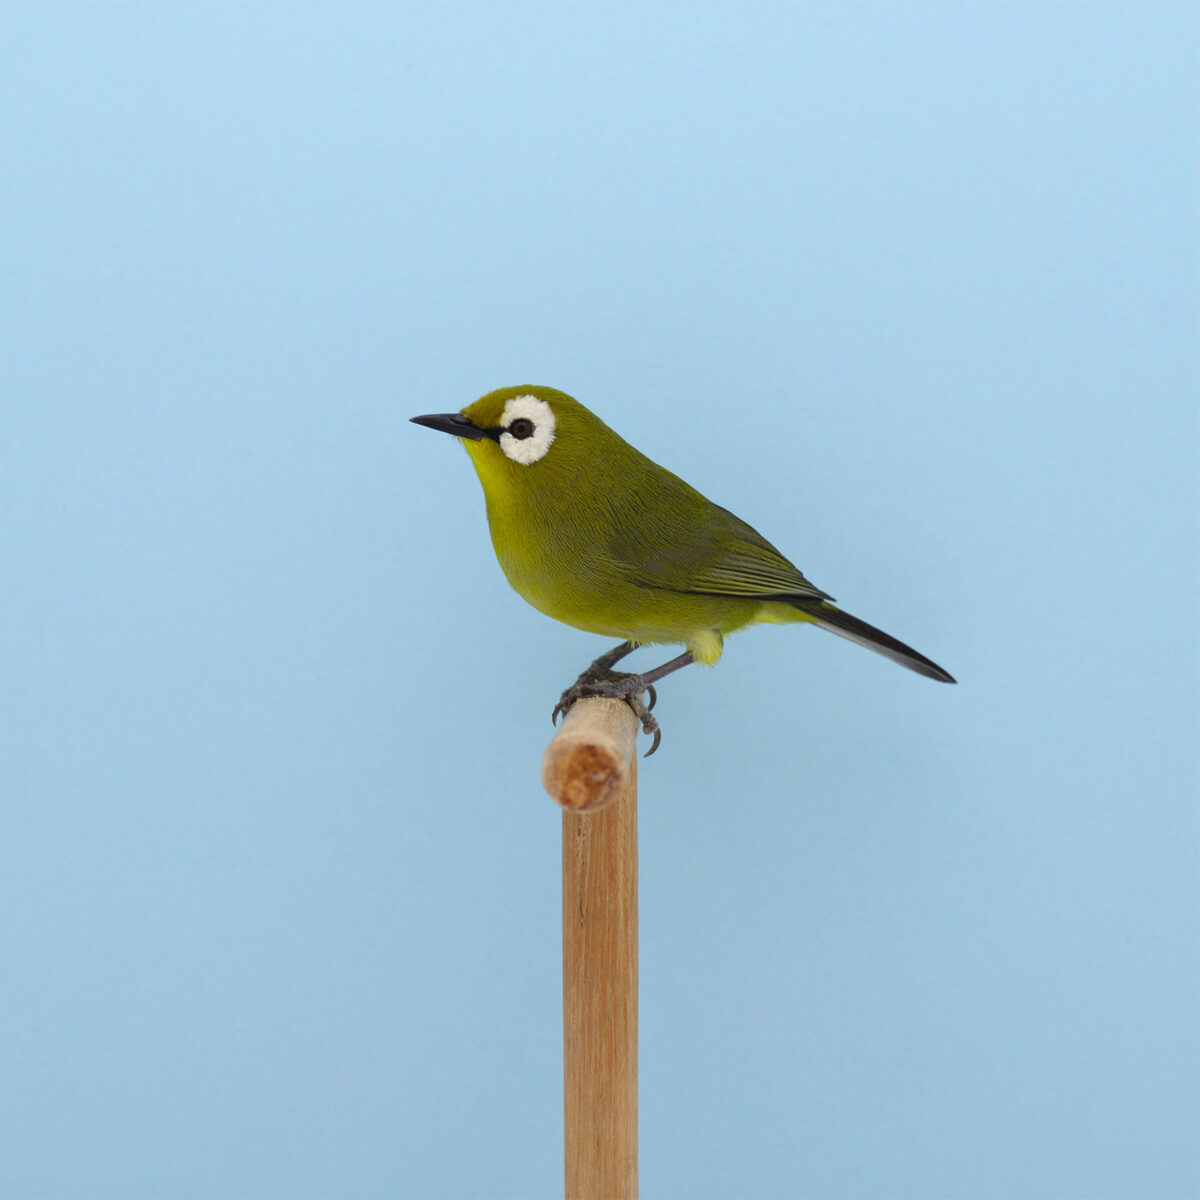 An Incomplete Dictionary Of Show Birds A Minimalist Bird Photography Series By Luke Stephenson (17)